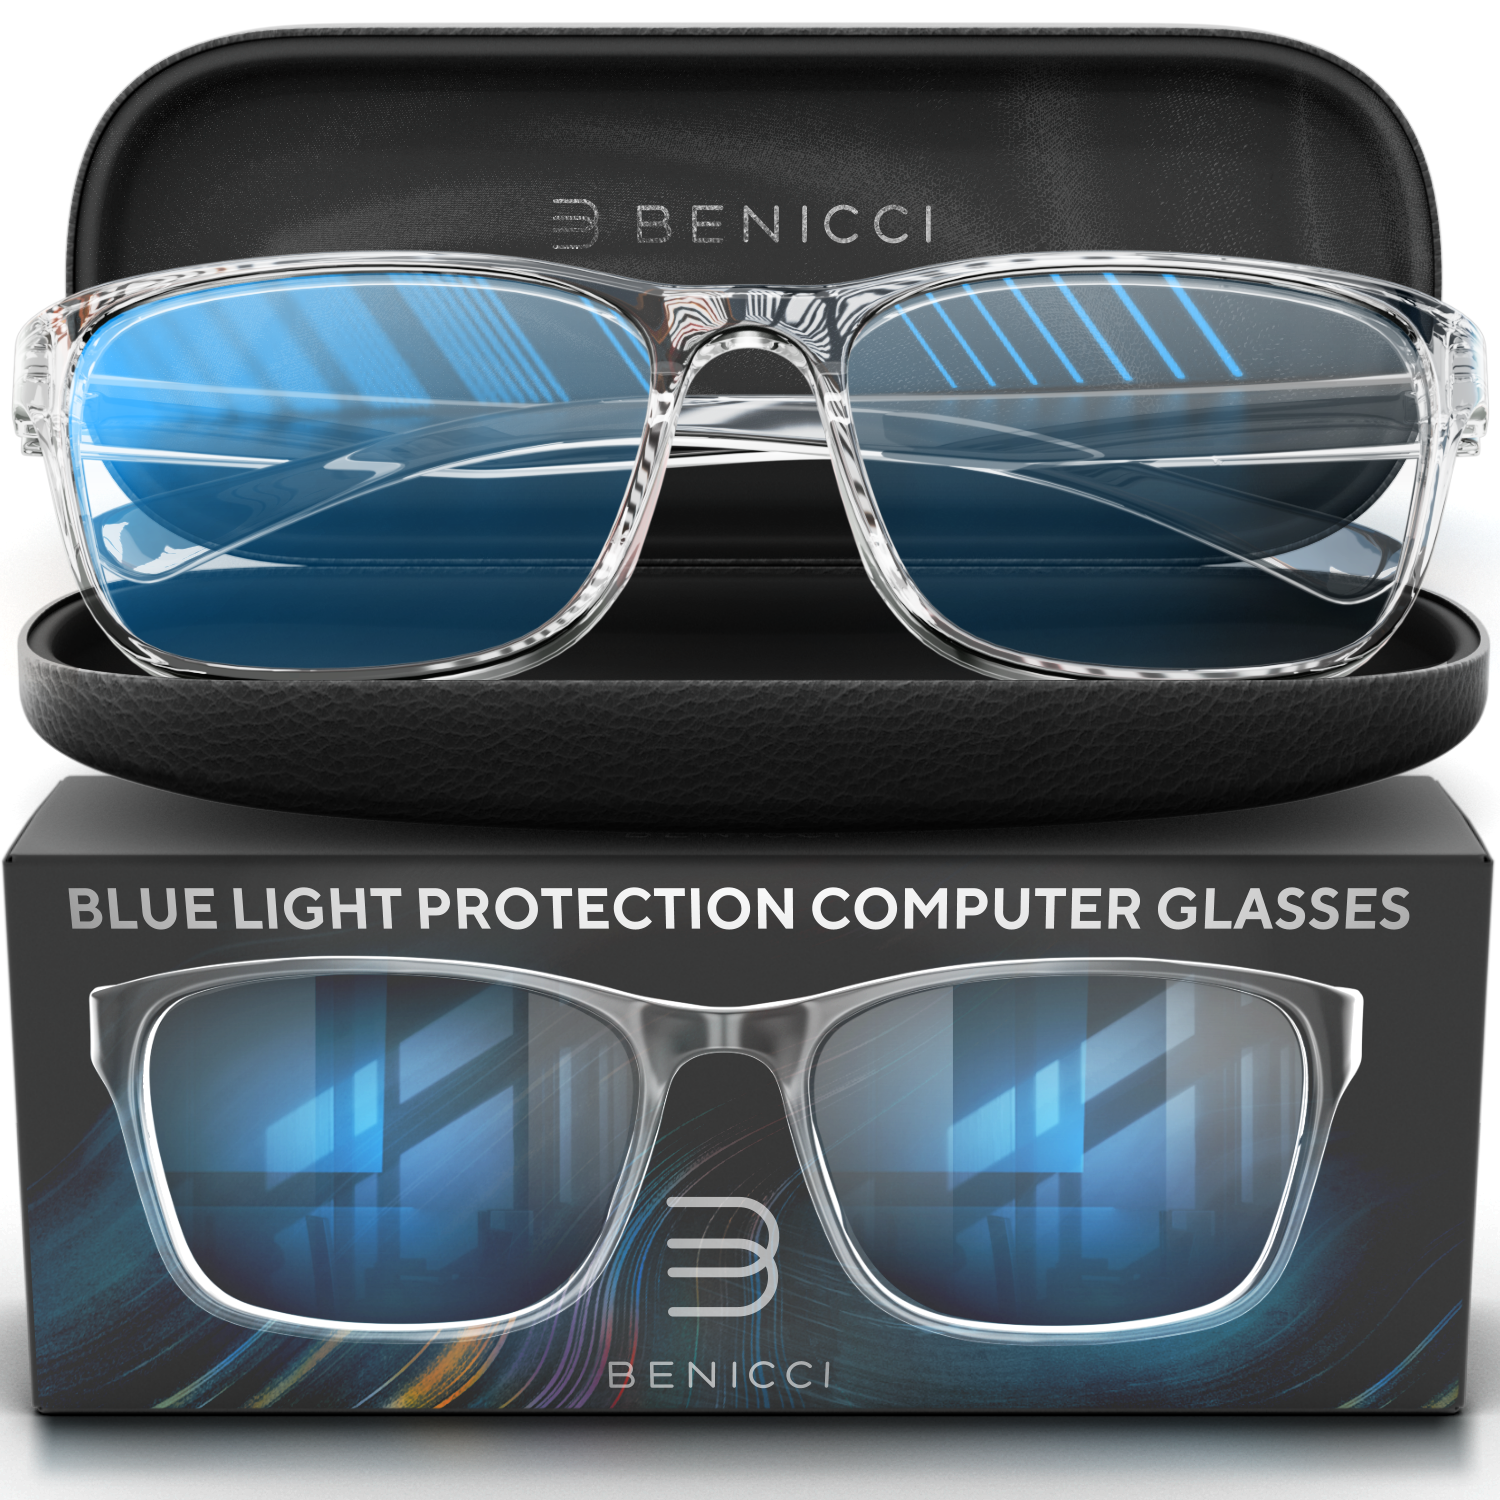 Stylish Blue Light Computer Blocking Glasses for Men and Women - Ease Digital Eye Strain, Dry Eyes, Headaches and Blurry Vision - Instantly Blocks